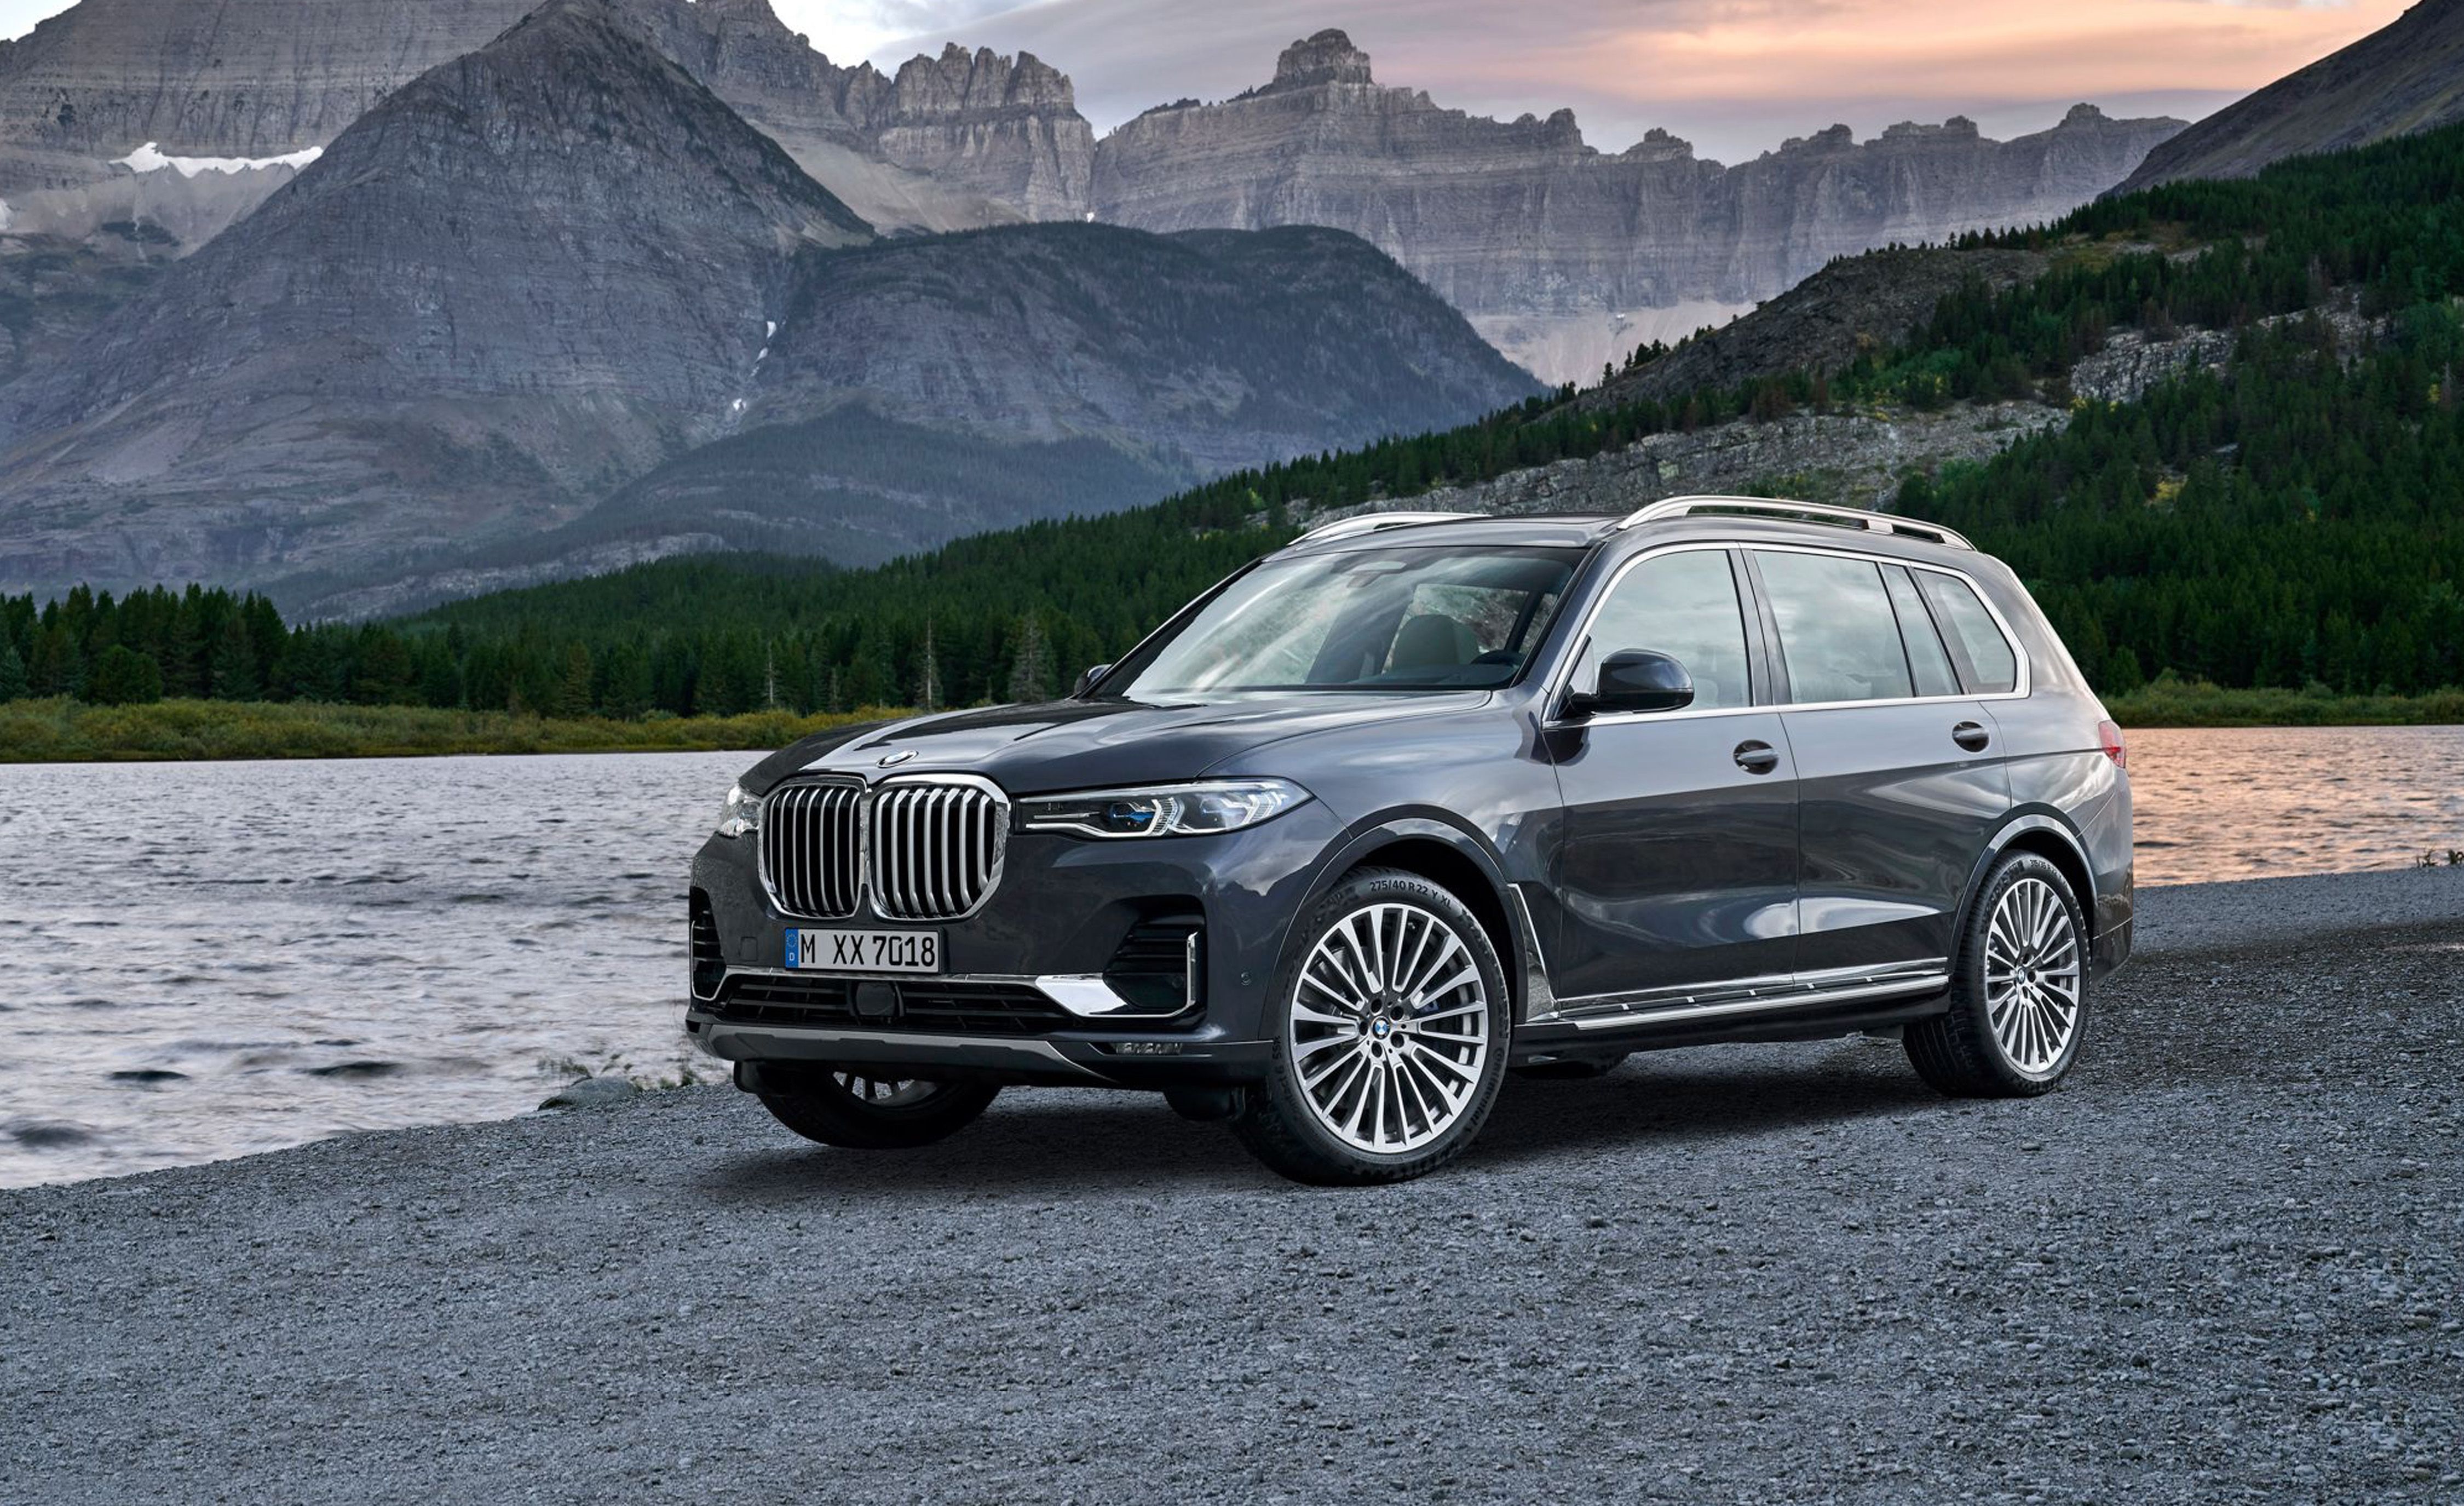 2020 BMW X7 Reviews | BMW X7 Price, Photos, and Specs | Car and Driver